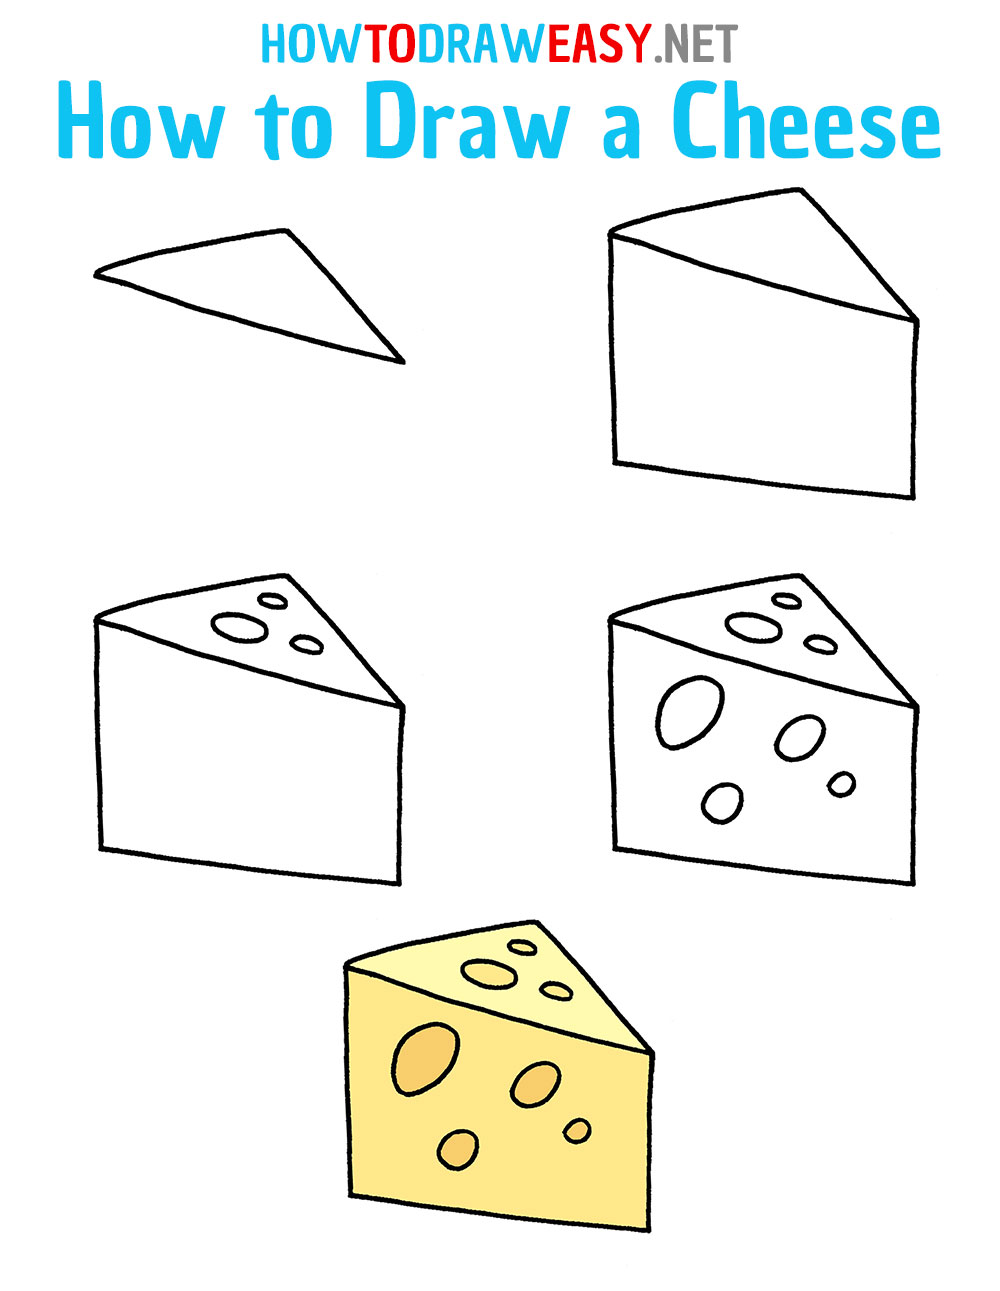 How to Draw a Cheese Step by Step